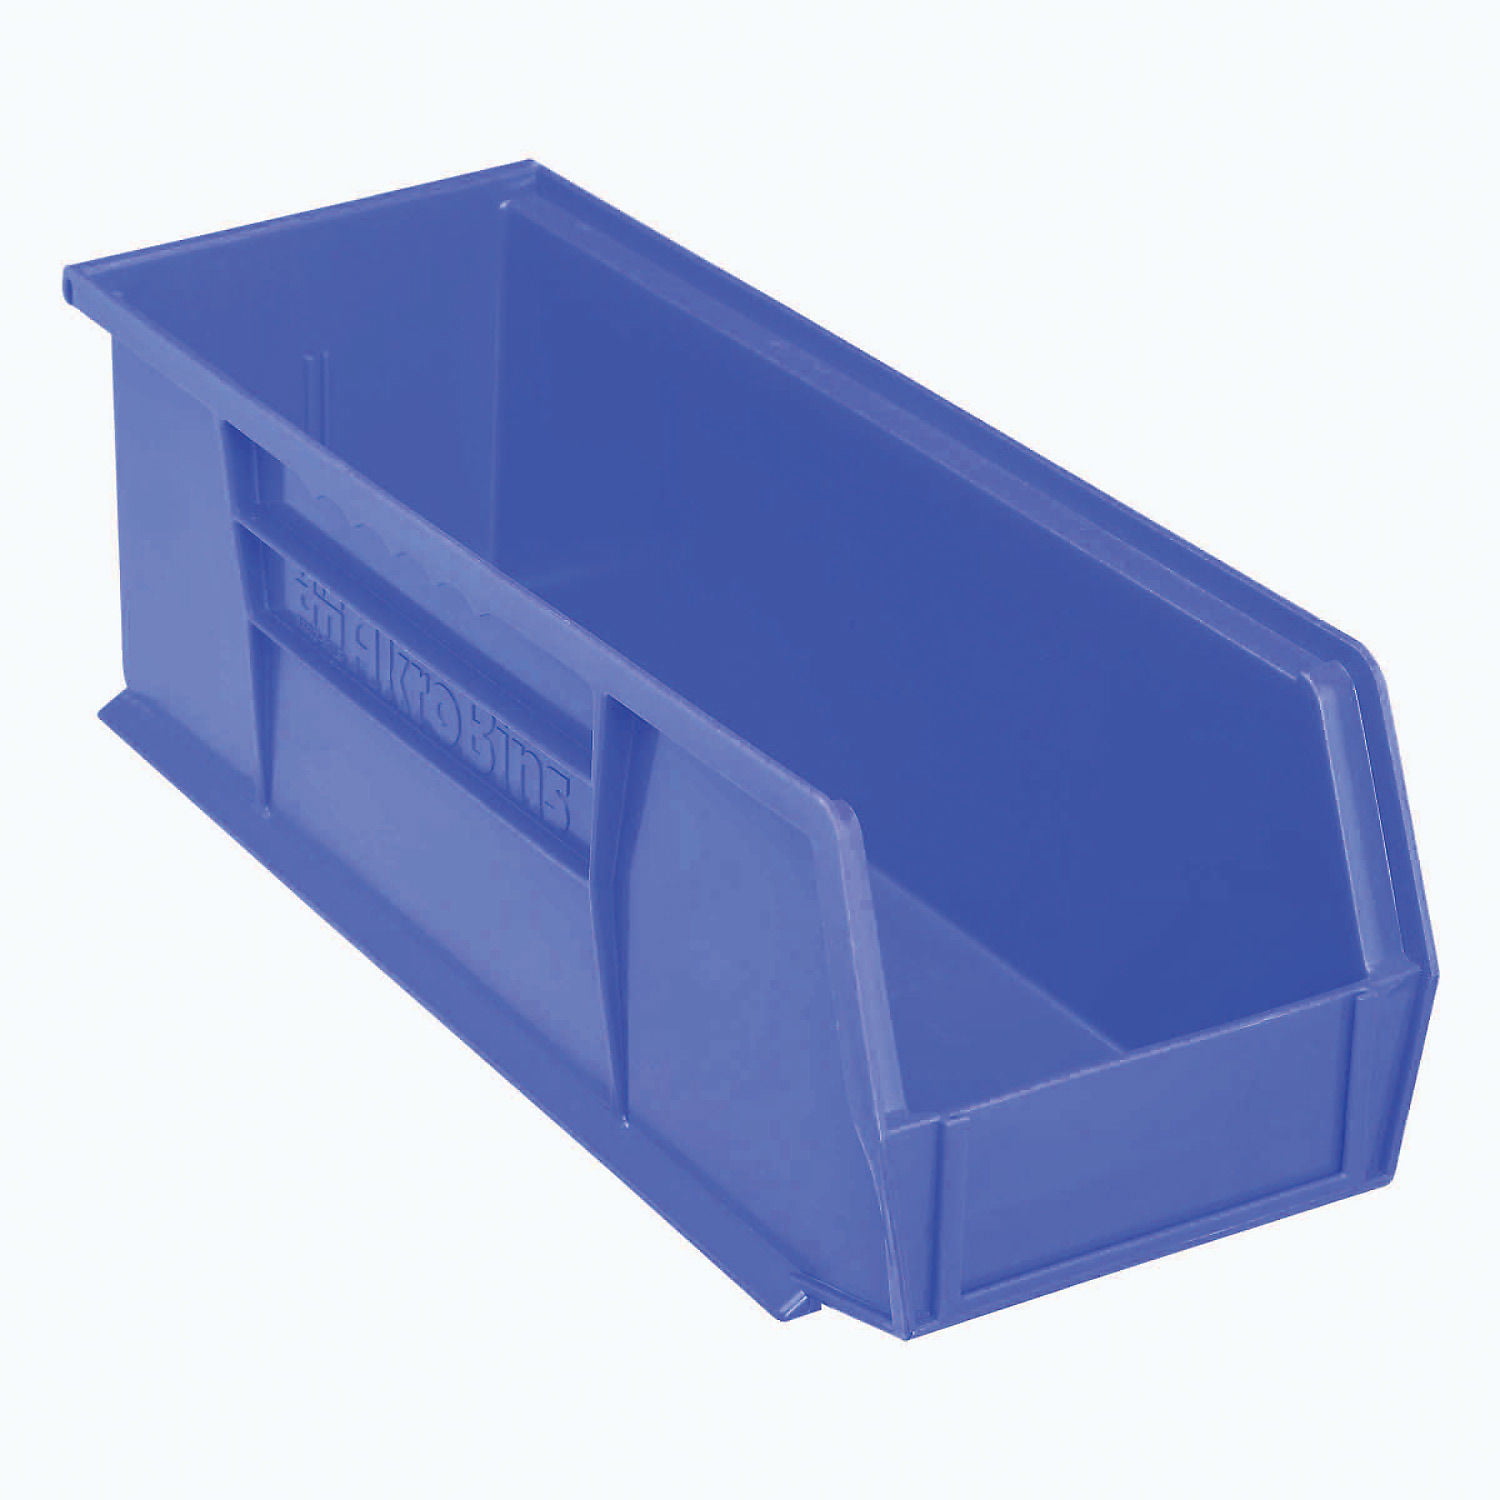 Yel Details about   AKRO-MILS 30224YELLO Hang/Stack Bin,10-7/8 x 4-1/8 x 4 